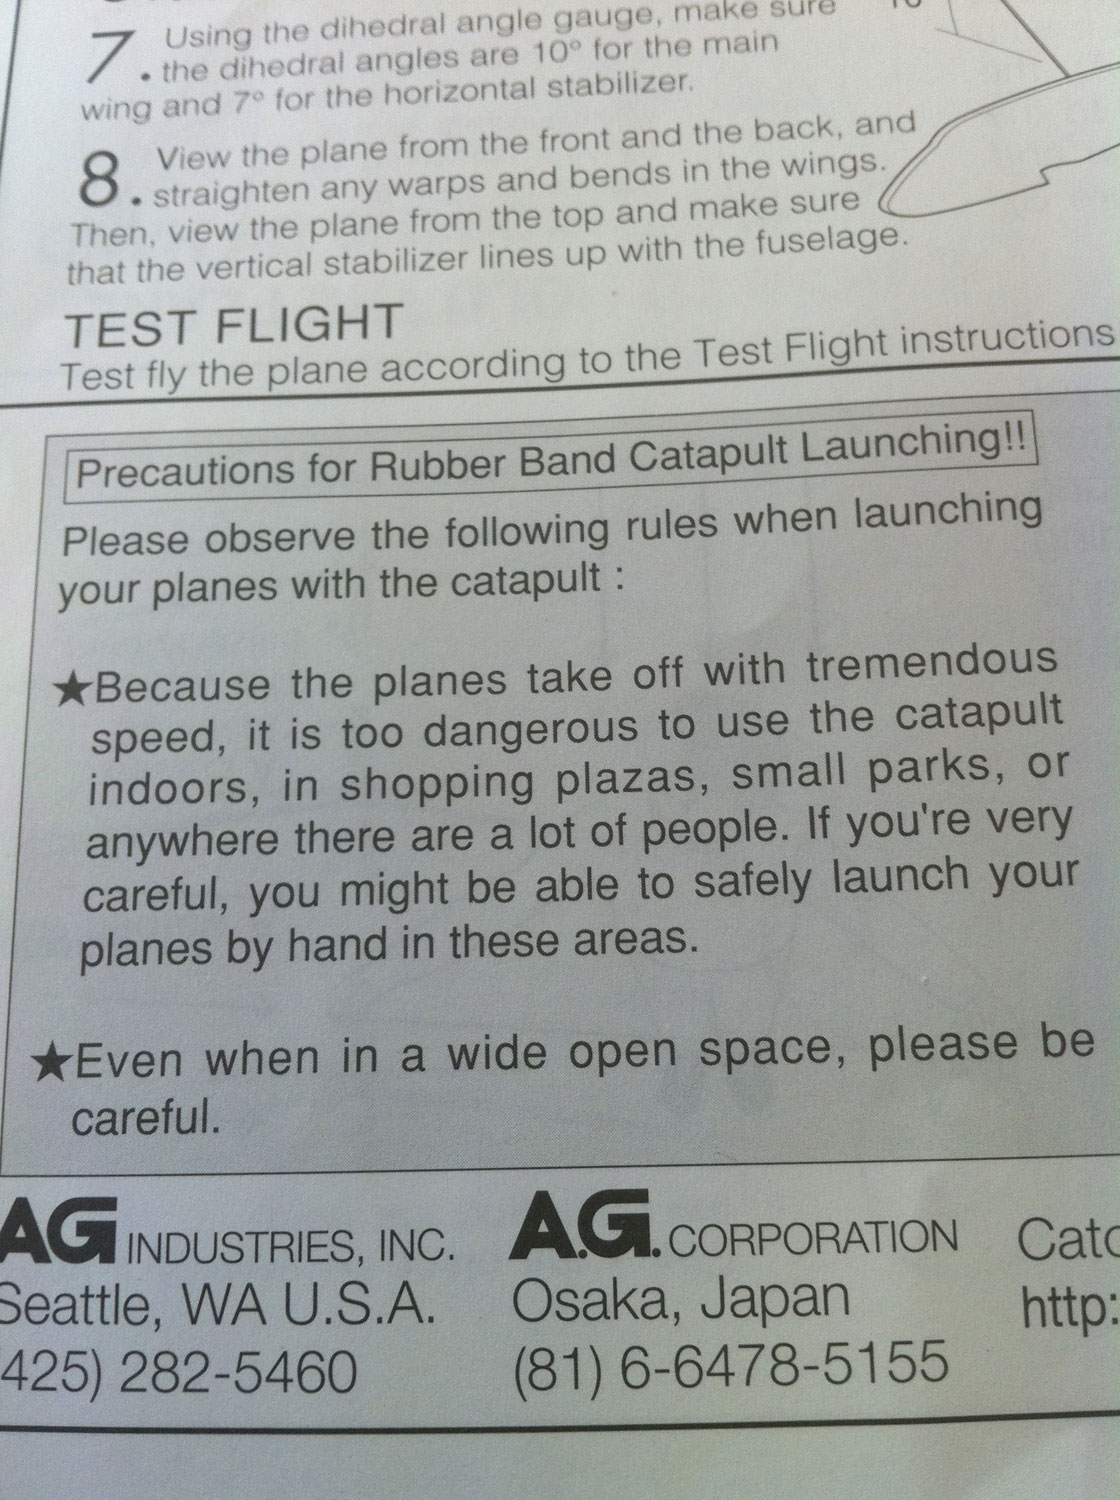 Caution - you might need an abandoned runway to fly this thing!